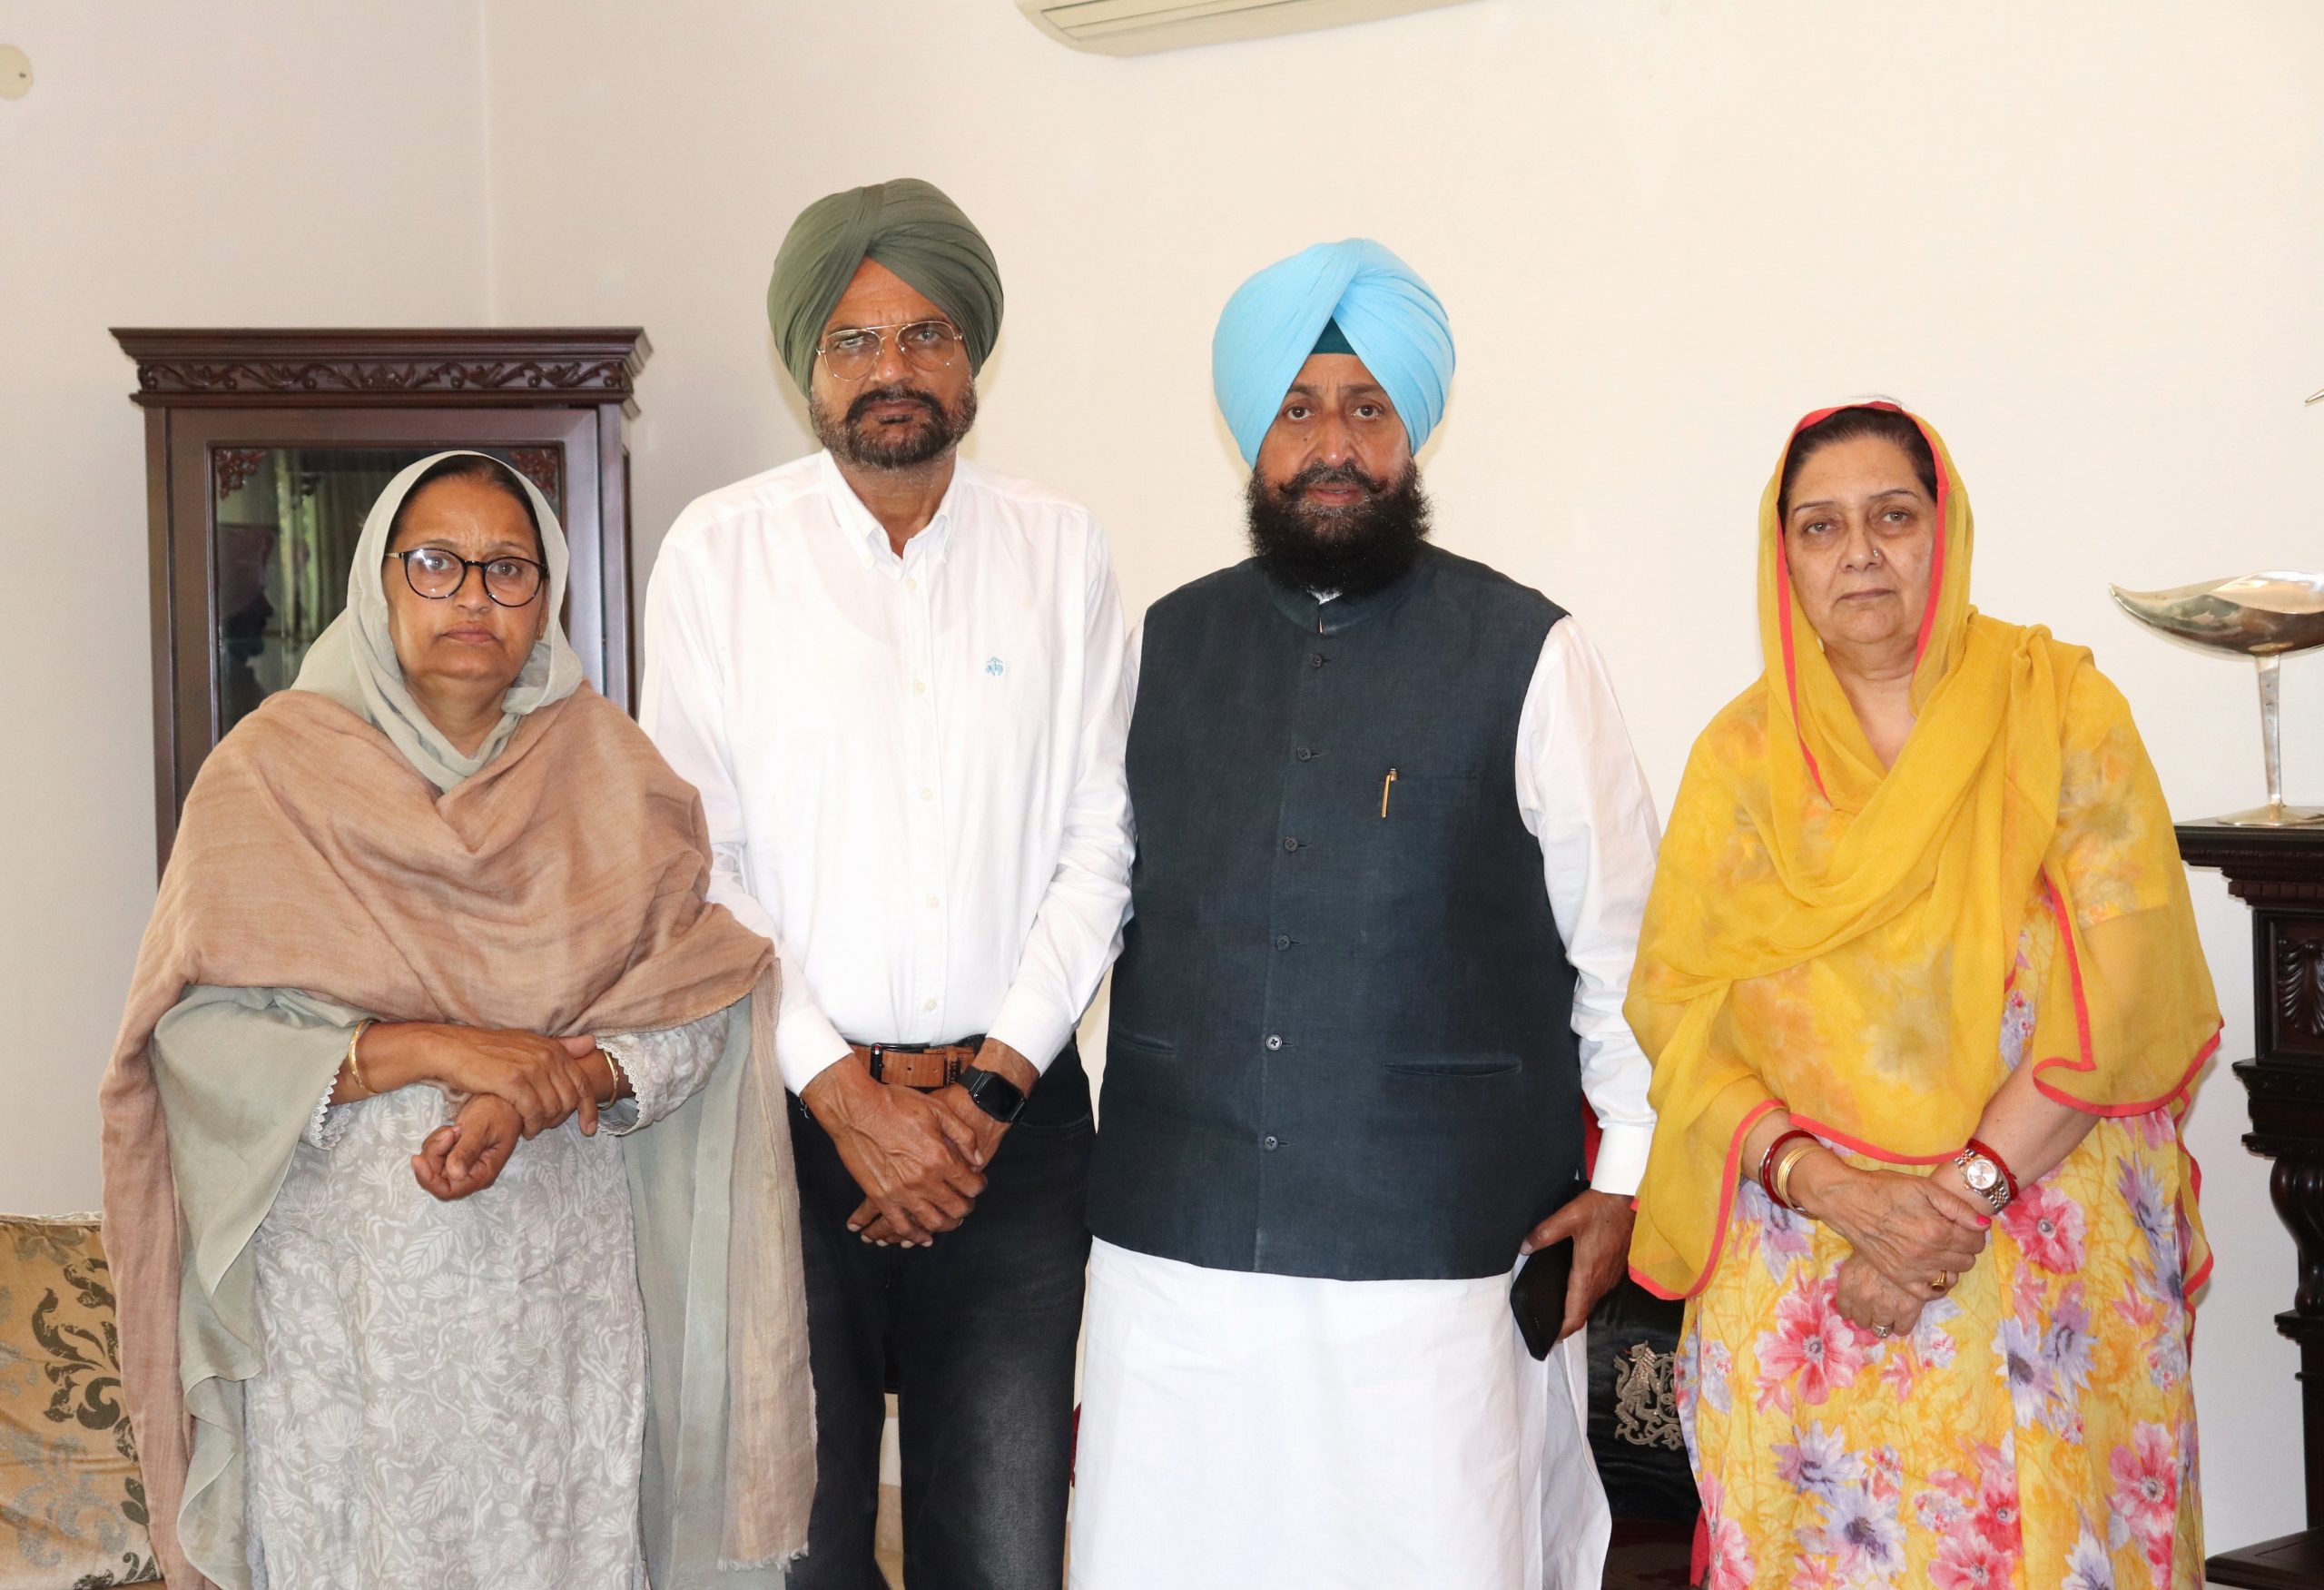 We stand in solidarity with Balkaur Singh's quest for justice